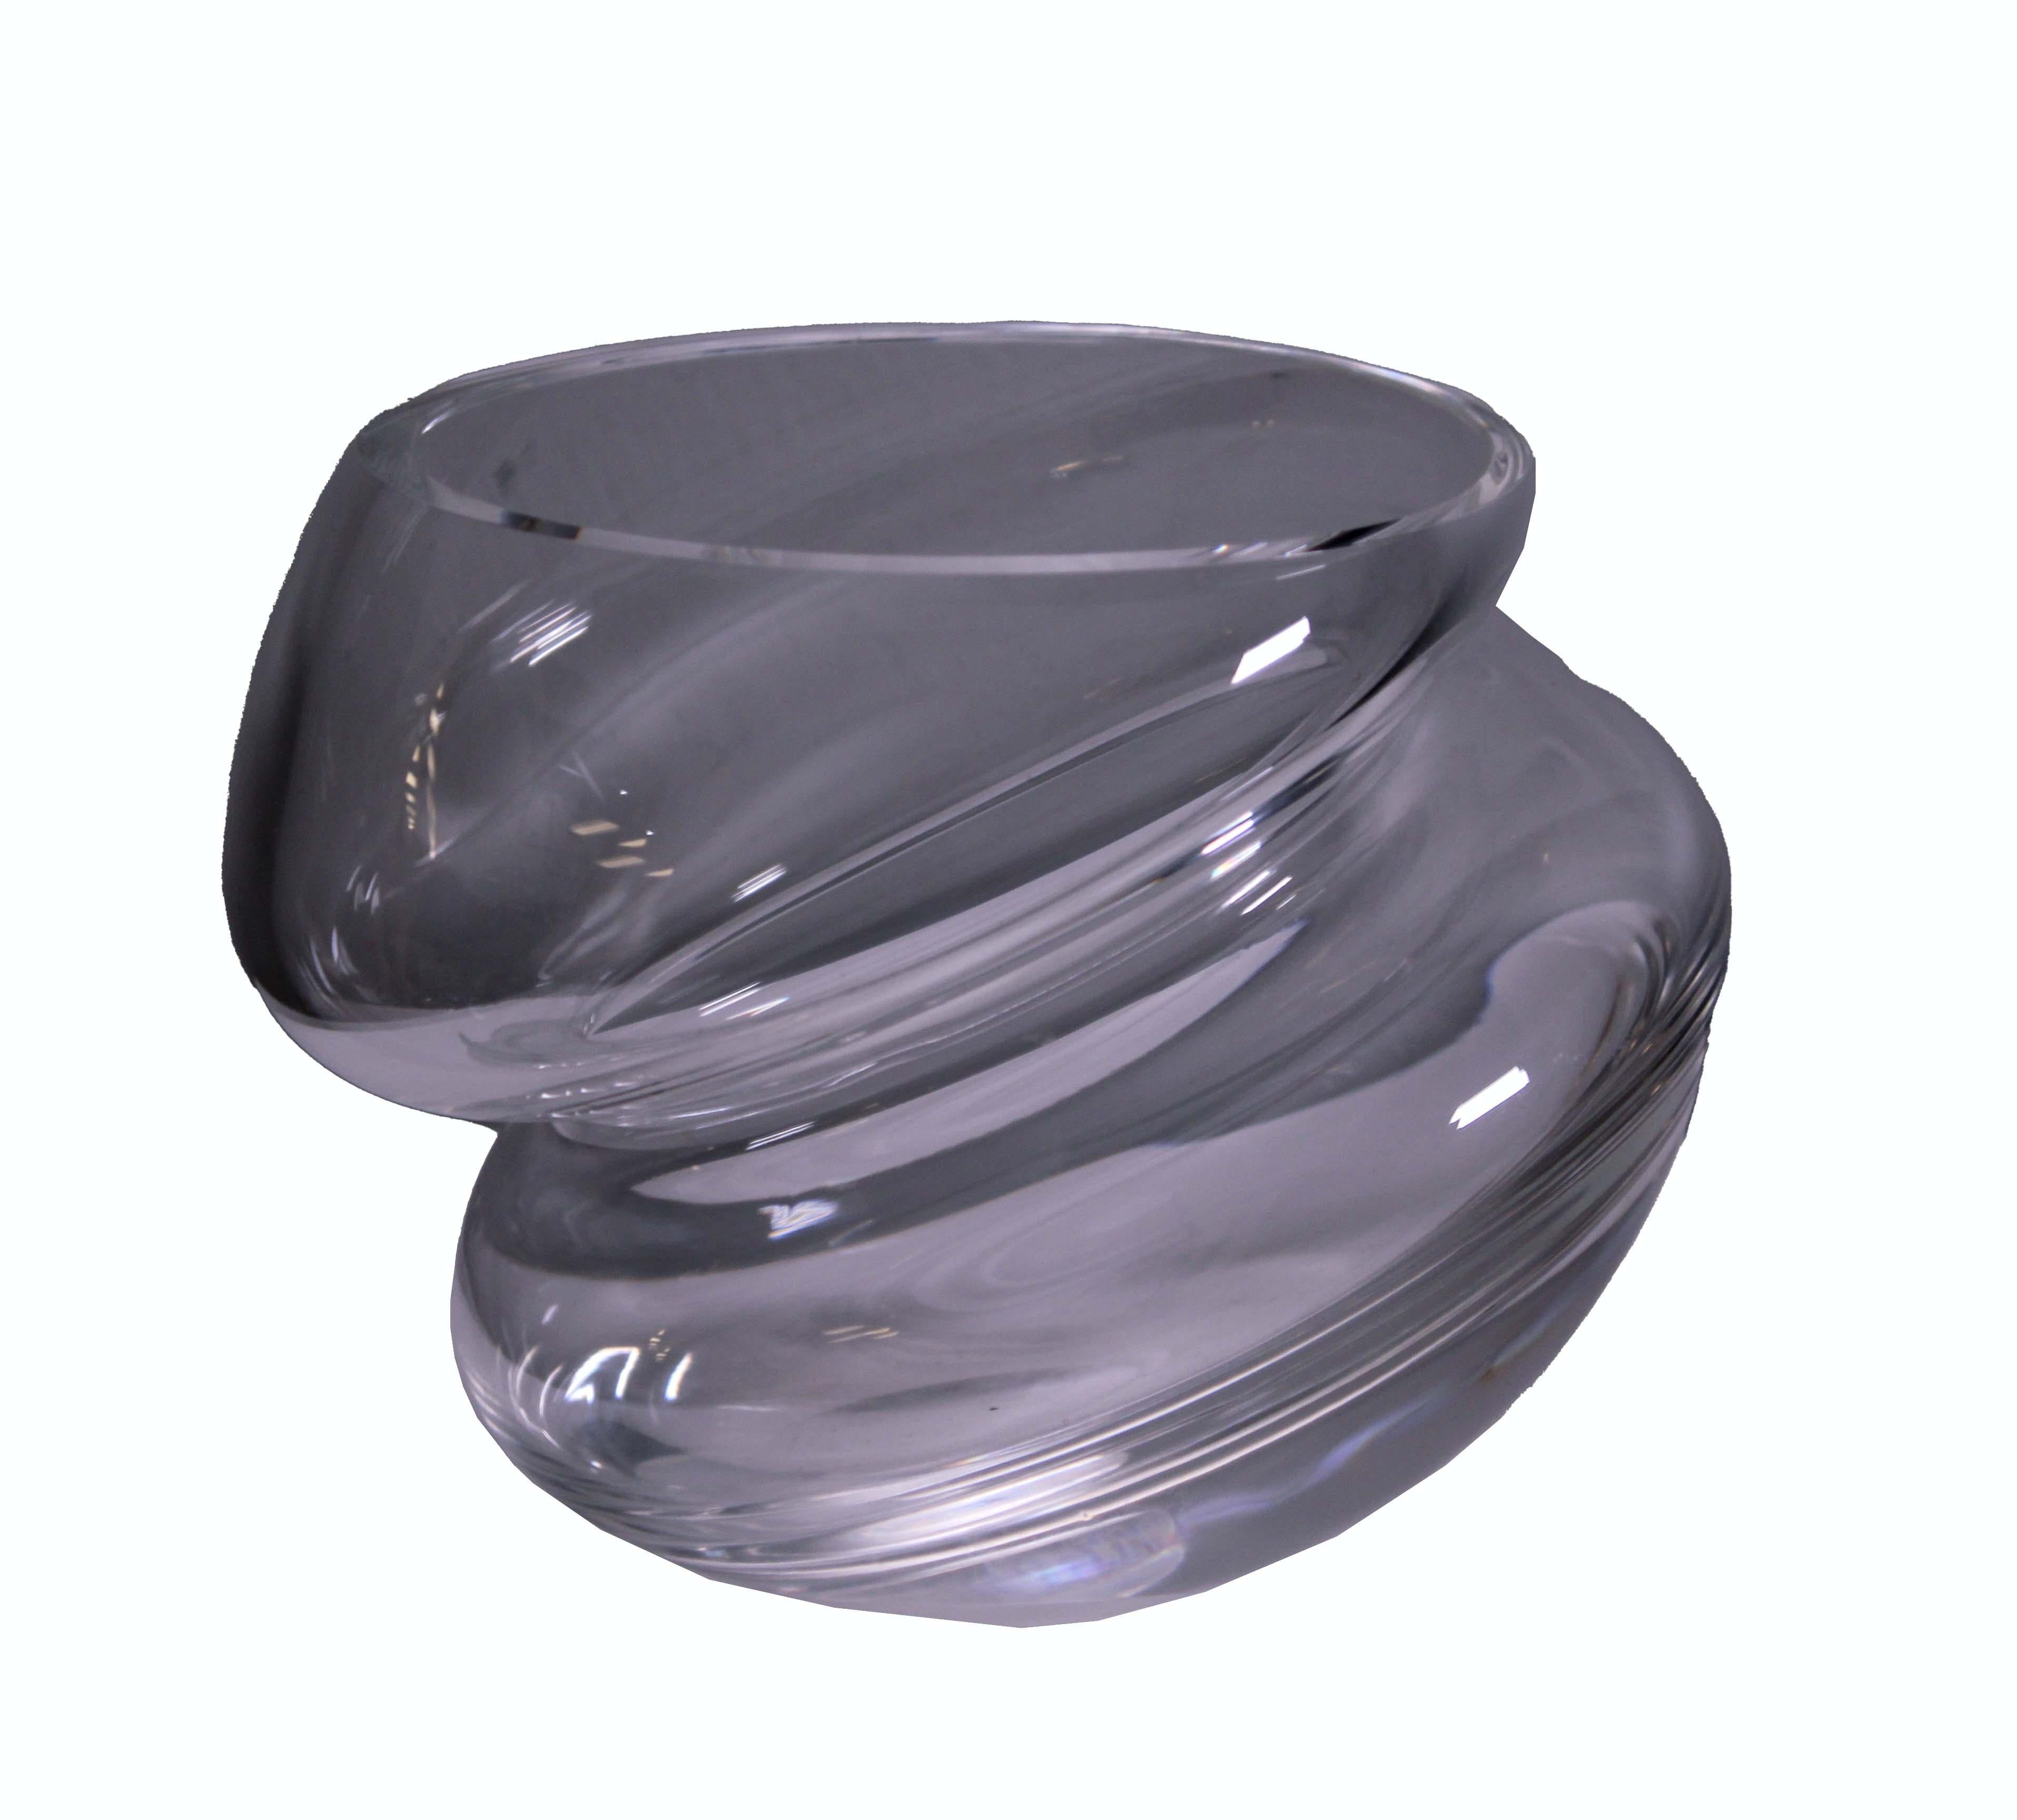 This sleek Steuben crystal nimbus dish is the perfect addition to any home. Featuring an elegant, modern design, this stunning piece will bring a touch of sophistication to your decor. This curved bowl gives the effect of a double stacked bowl. It's